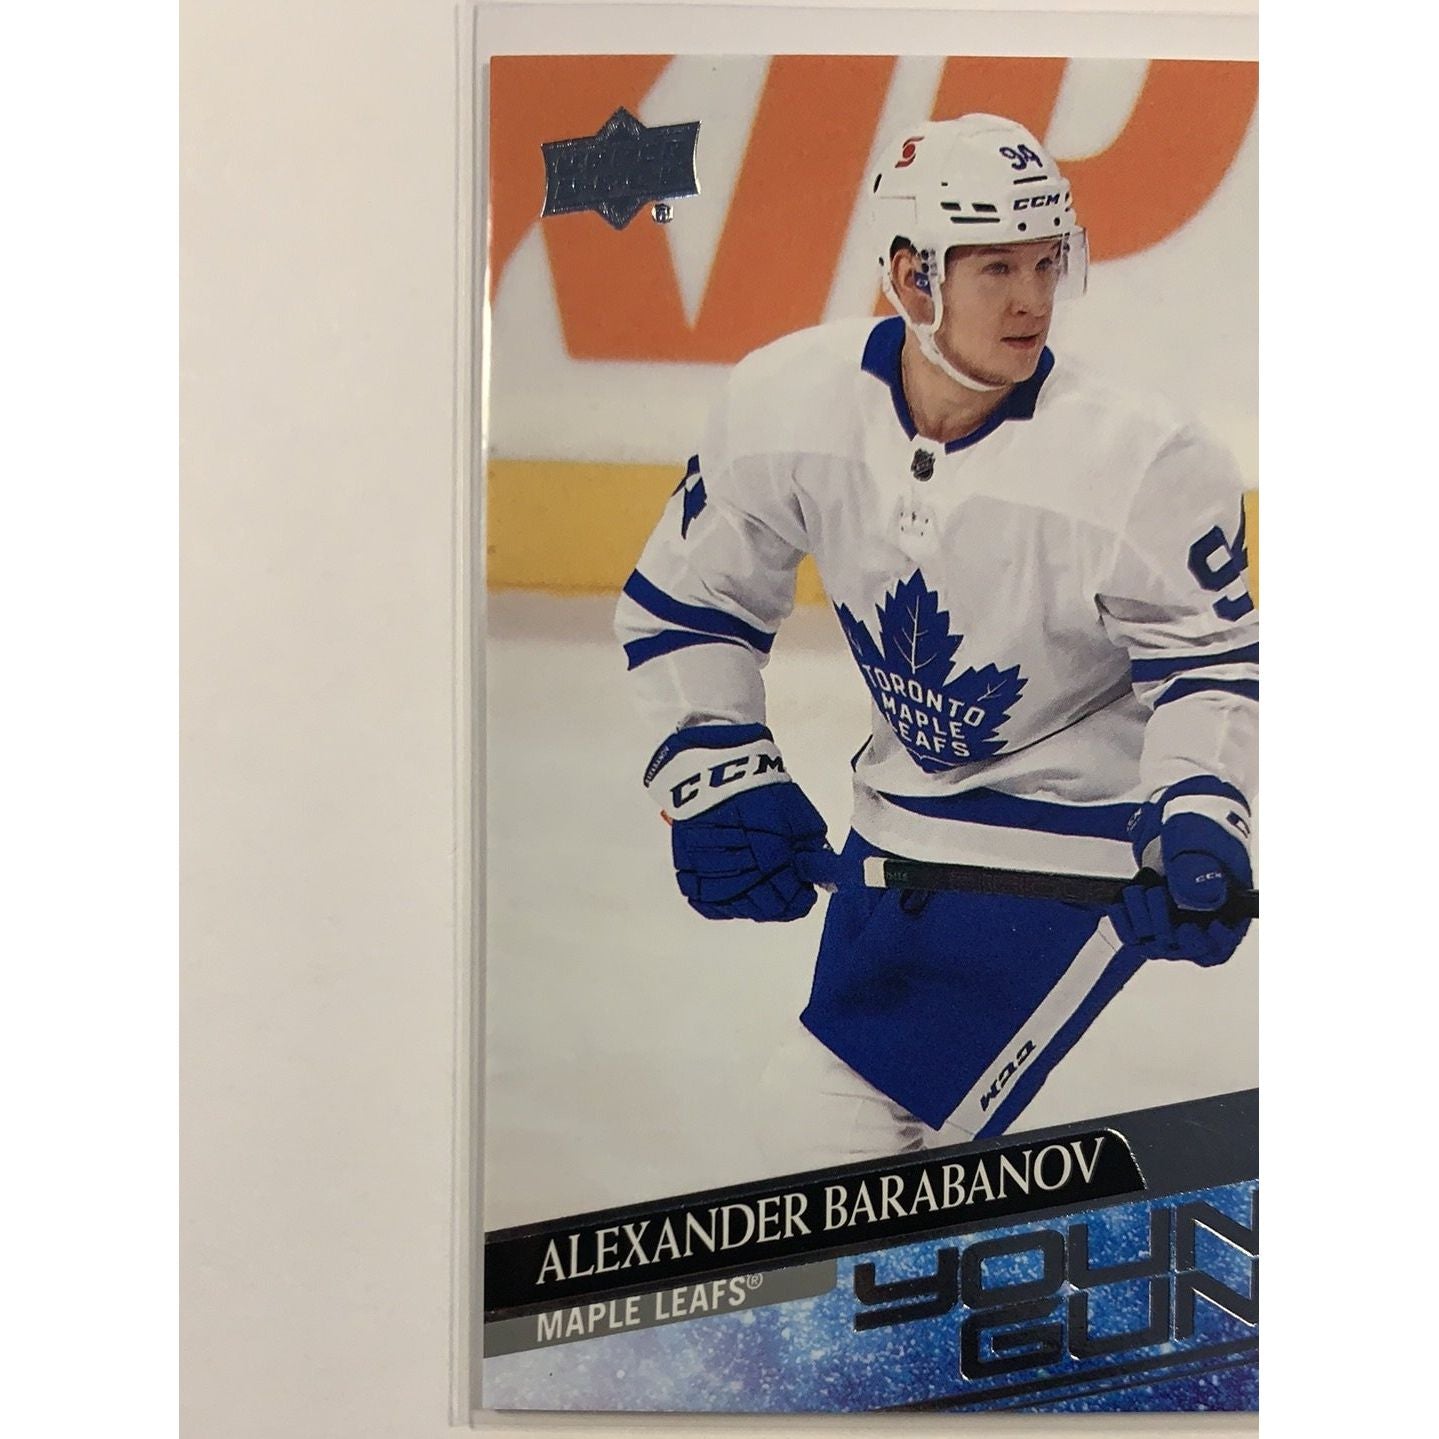  2020-21 Upper Deck Series 2 Alexander Barbanov Young Guns  Local Legends Cards & Collectibles